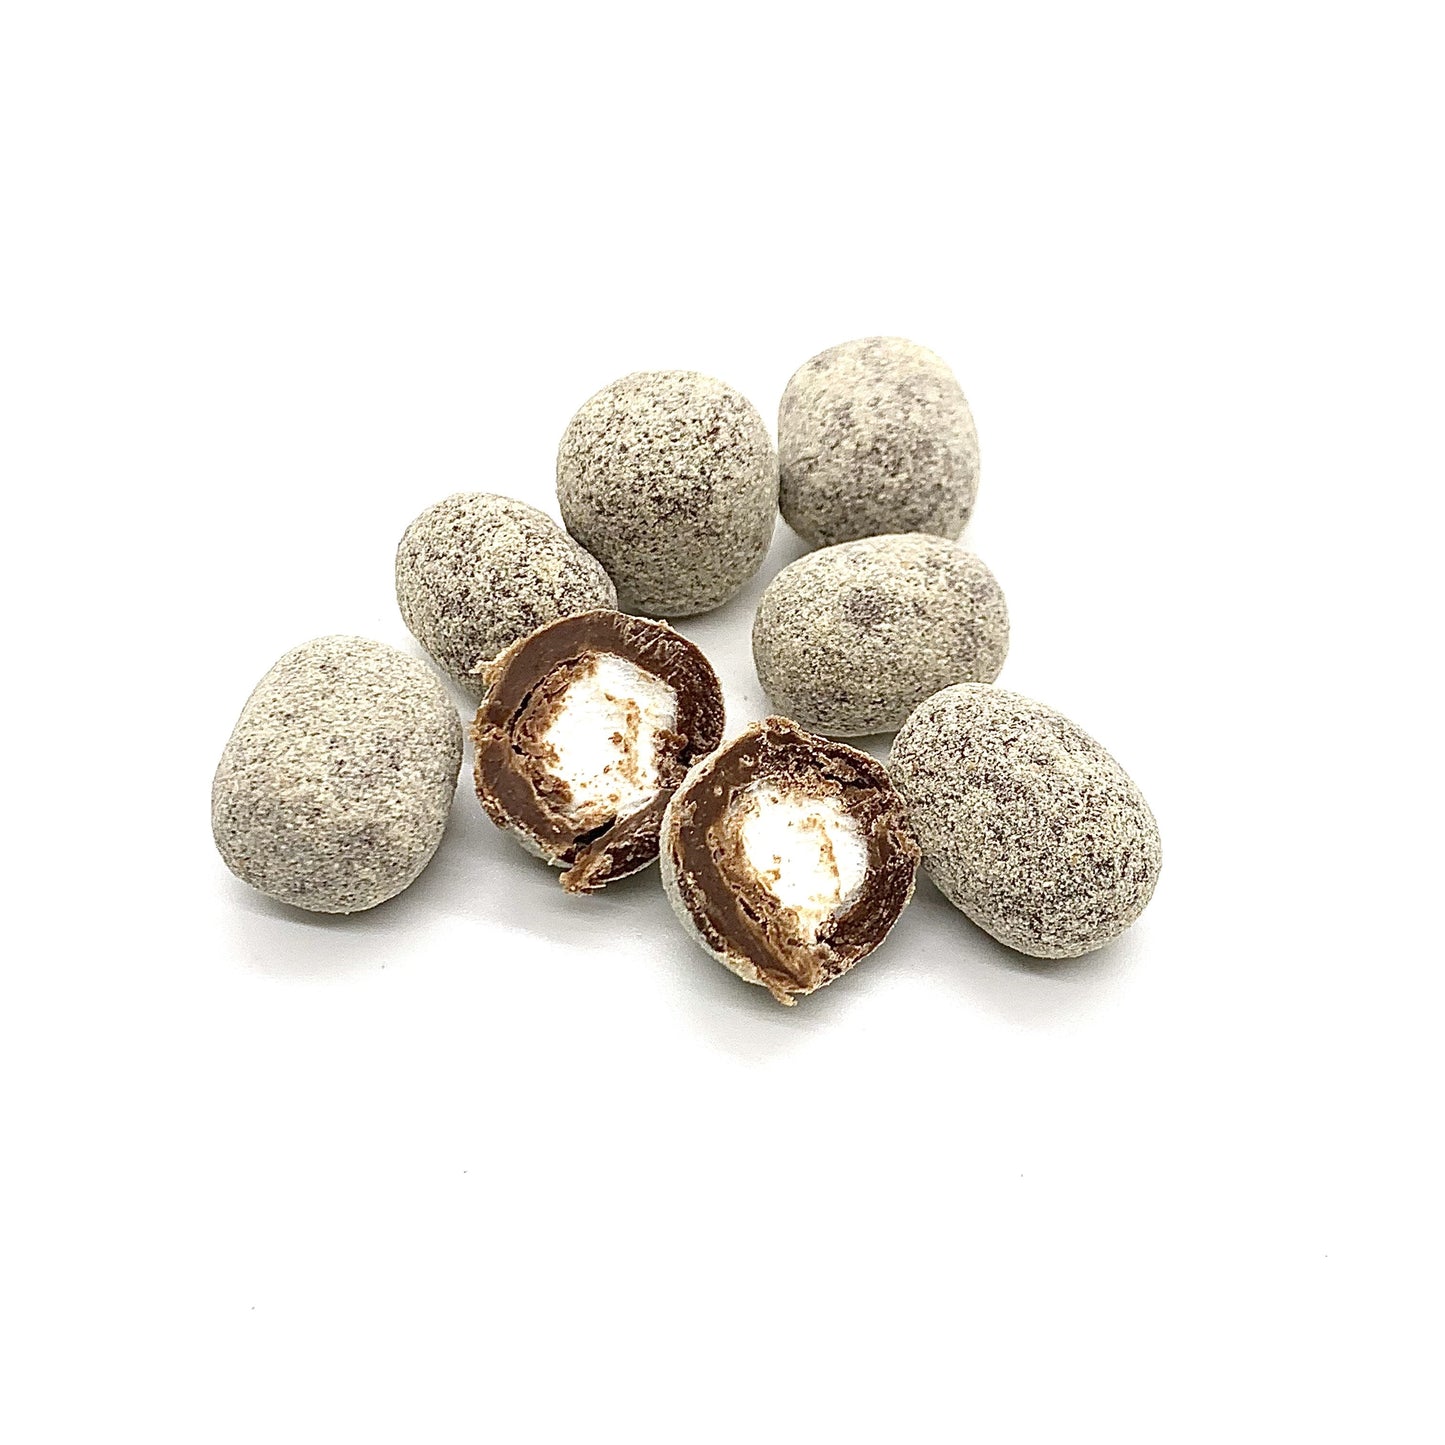 (NEW) S'mores - Wholesale Unlimited Inc.